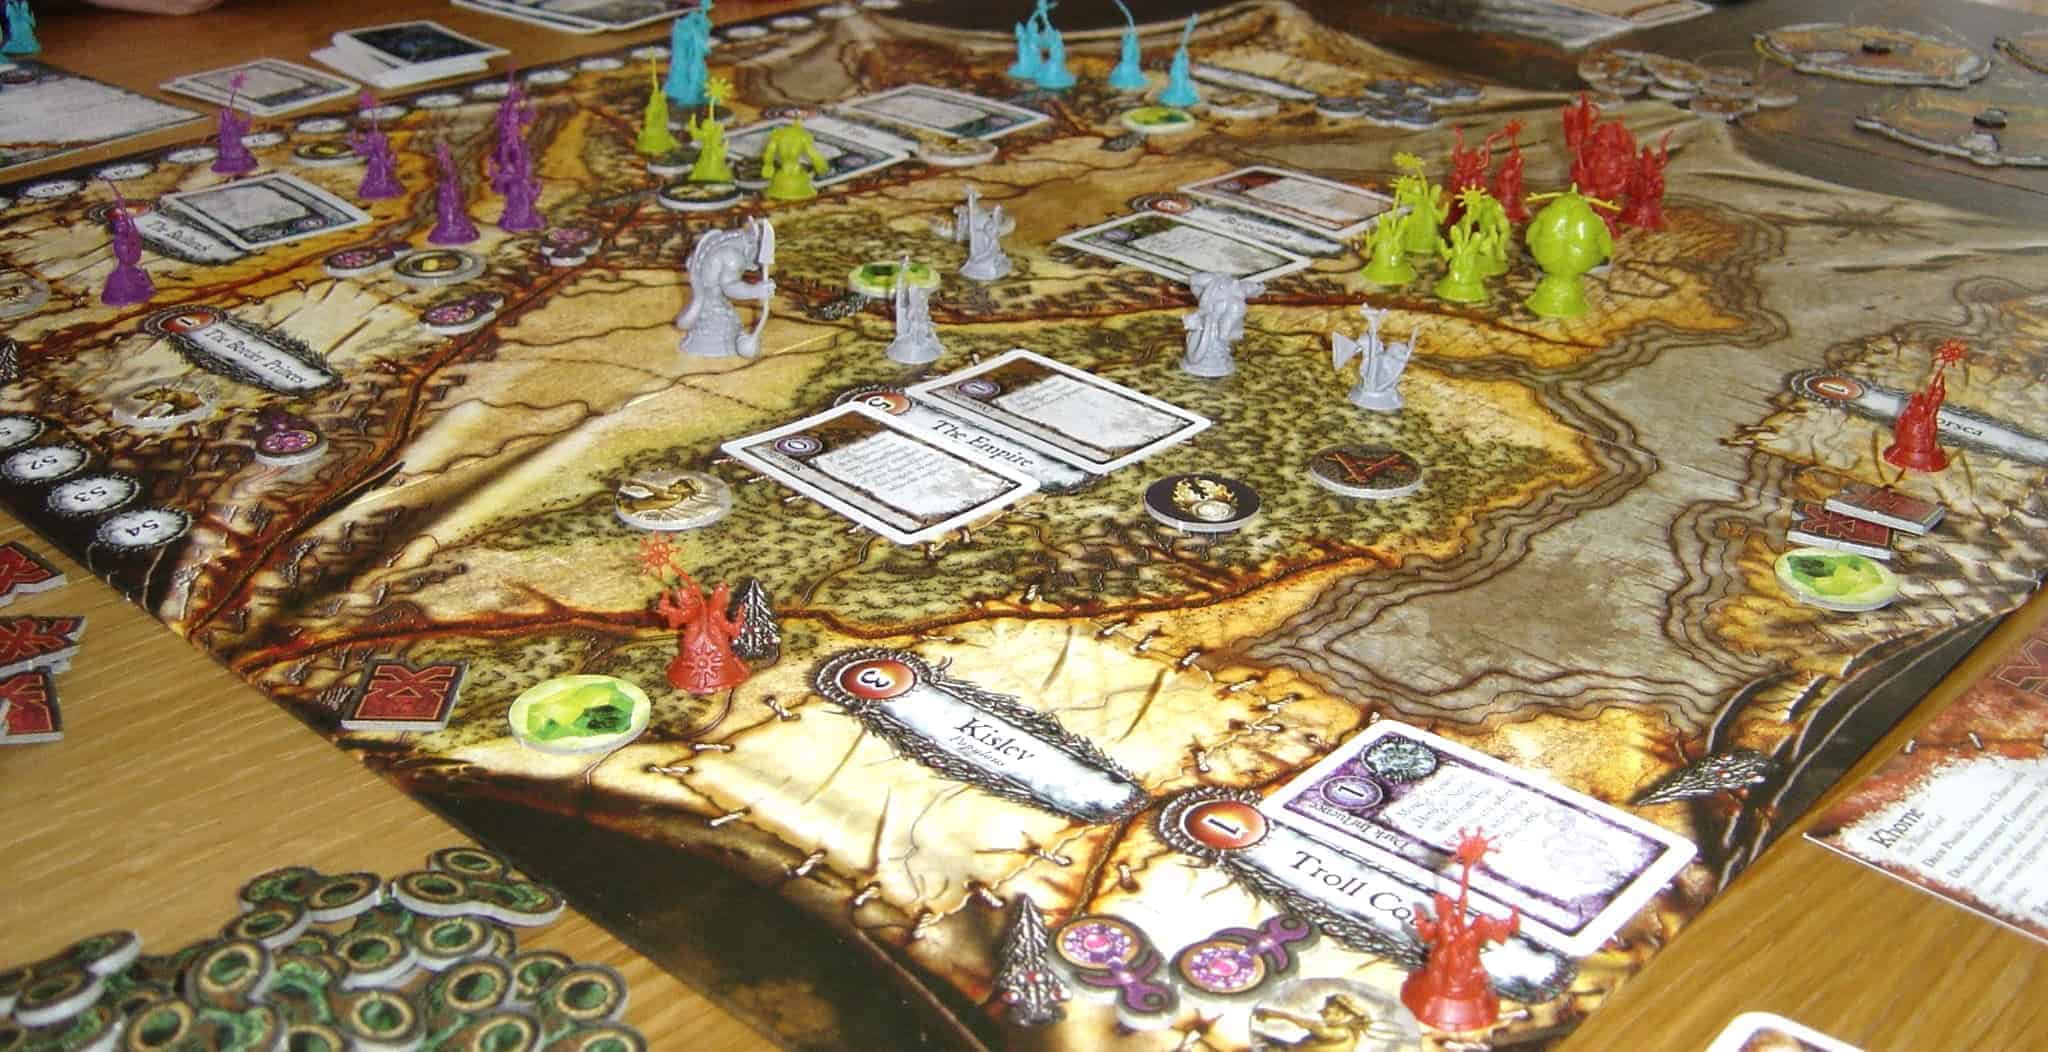 If you like Warhammer fantasy board games then Chaos in the Old World is engaging, thematic and simply enjoyable to play!